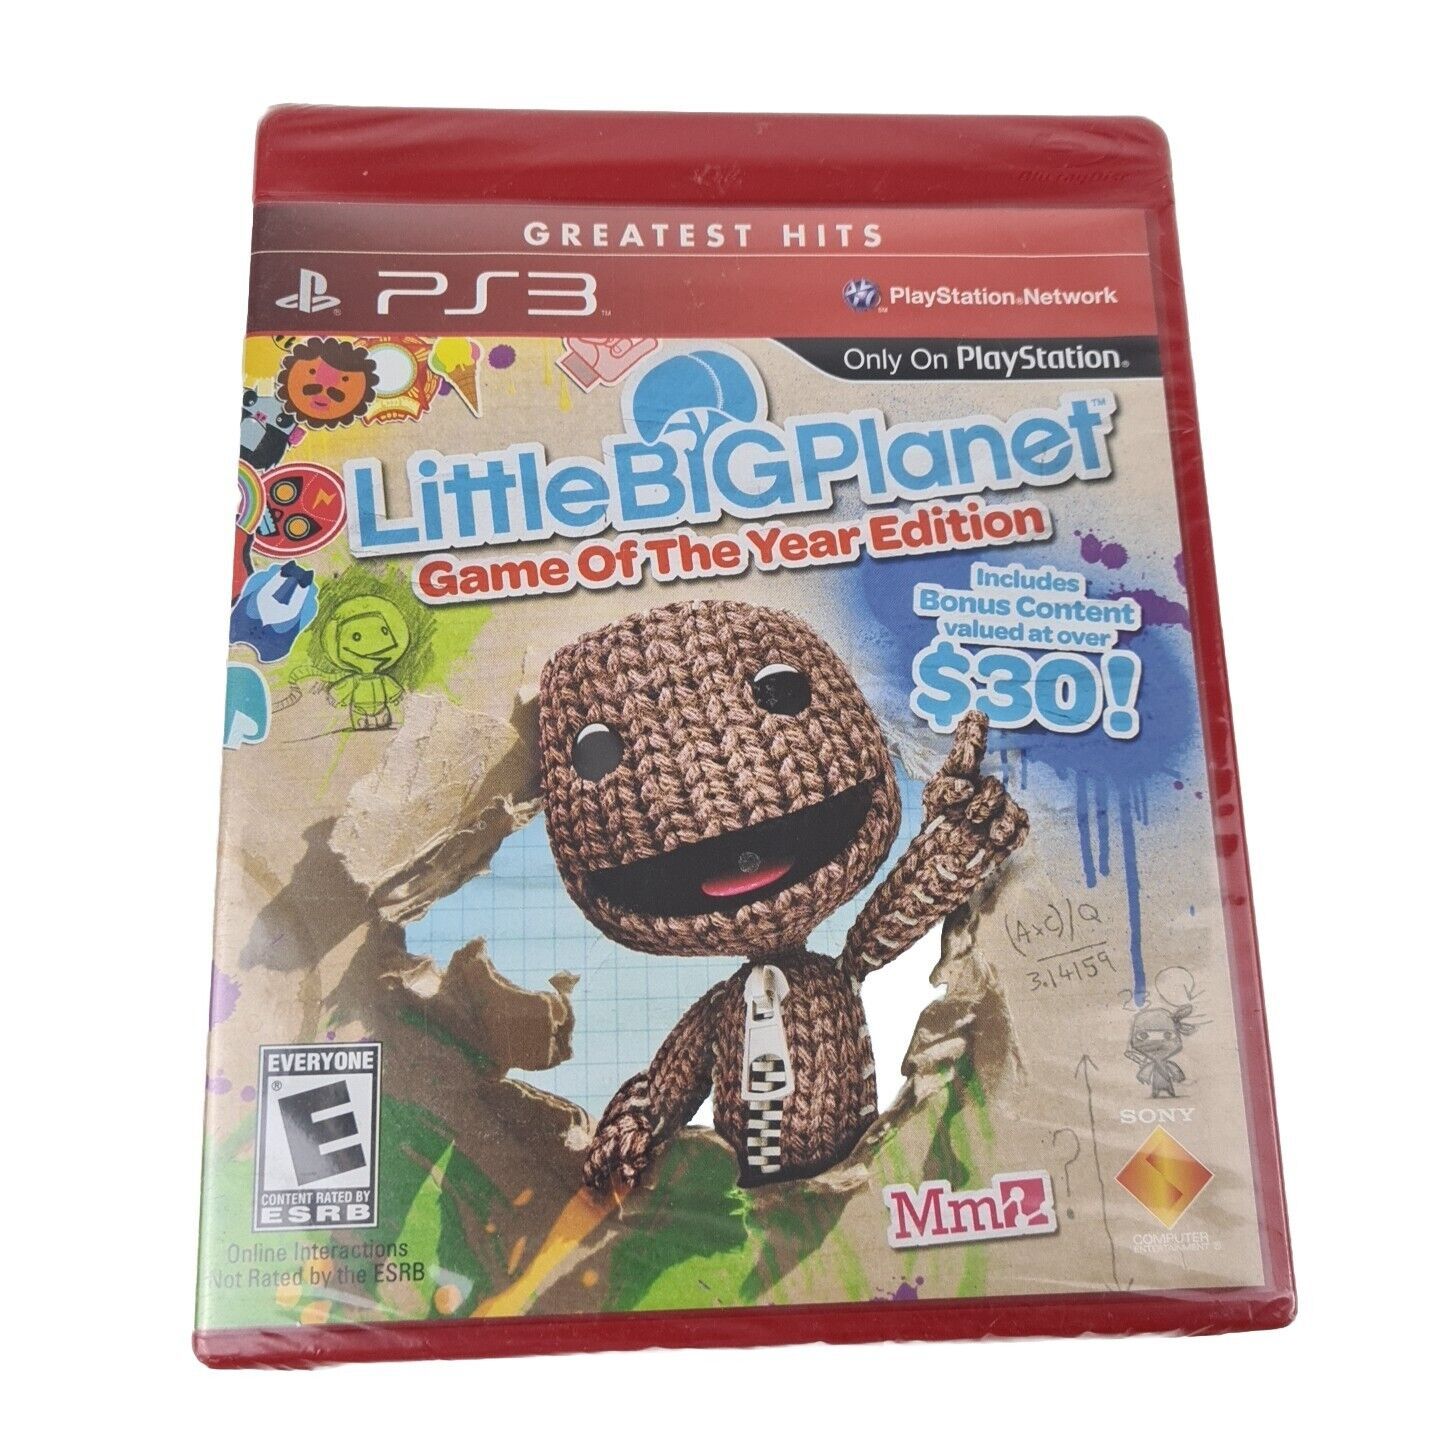 Primary image for  LittleBigPlanet Game of the Year Edition 2007 Playstation 3 PS3 Game Sealed